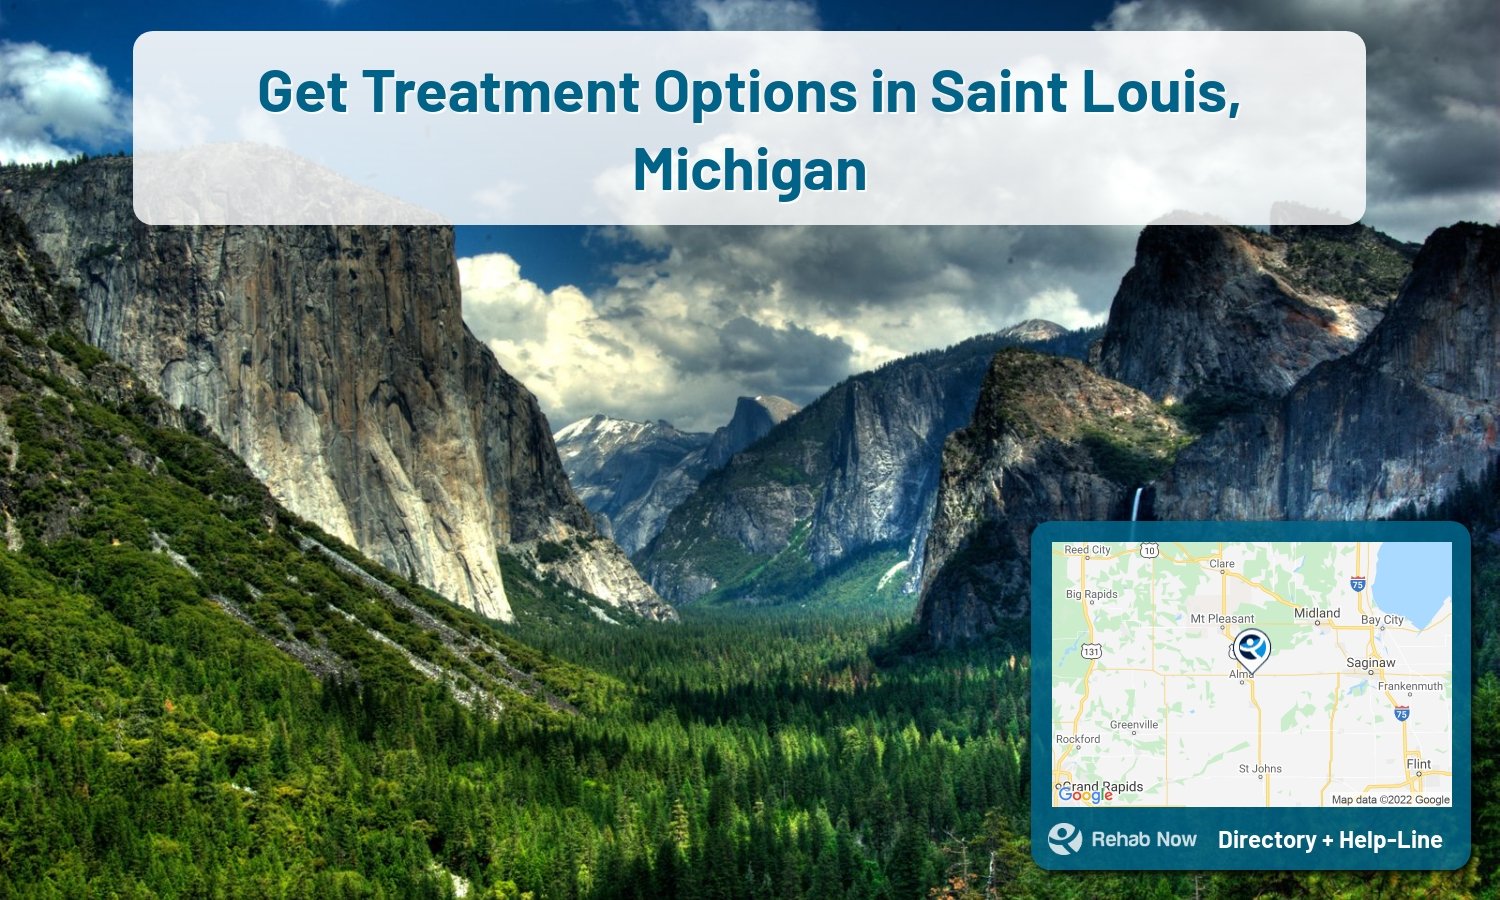 Drug rehab and alcohol treatment services near you in Saint Louis, Michigan. Need help choosing a center? Call us, free.